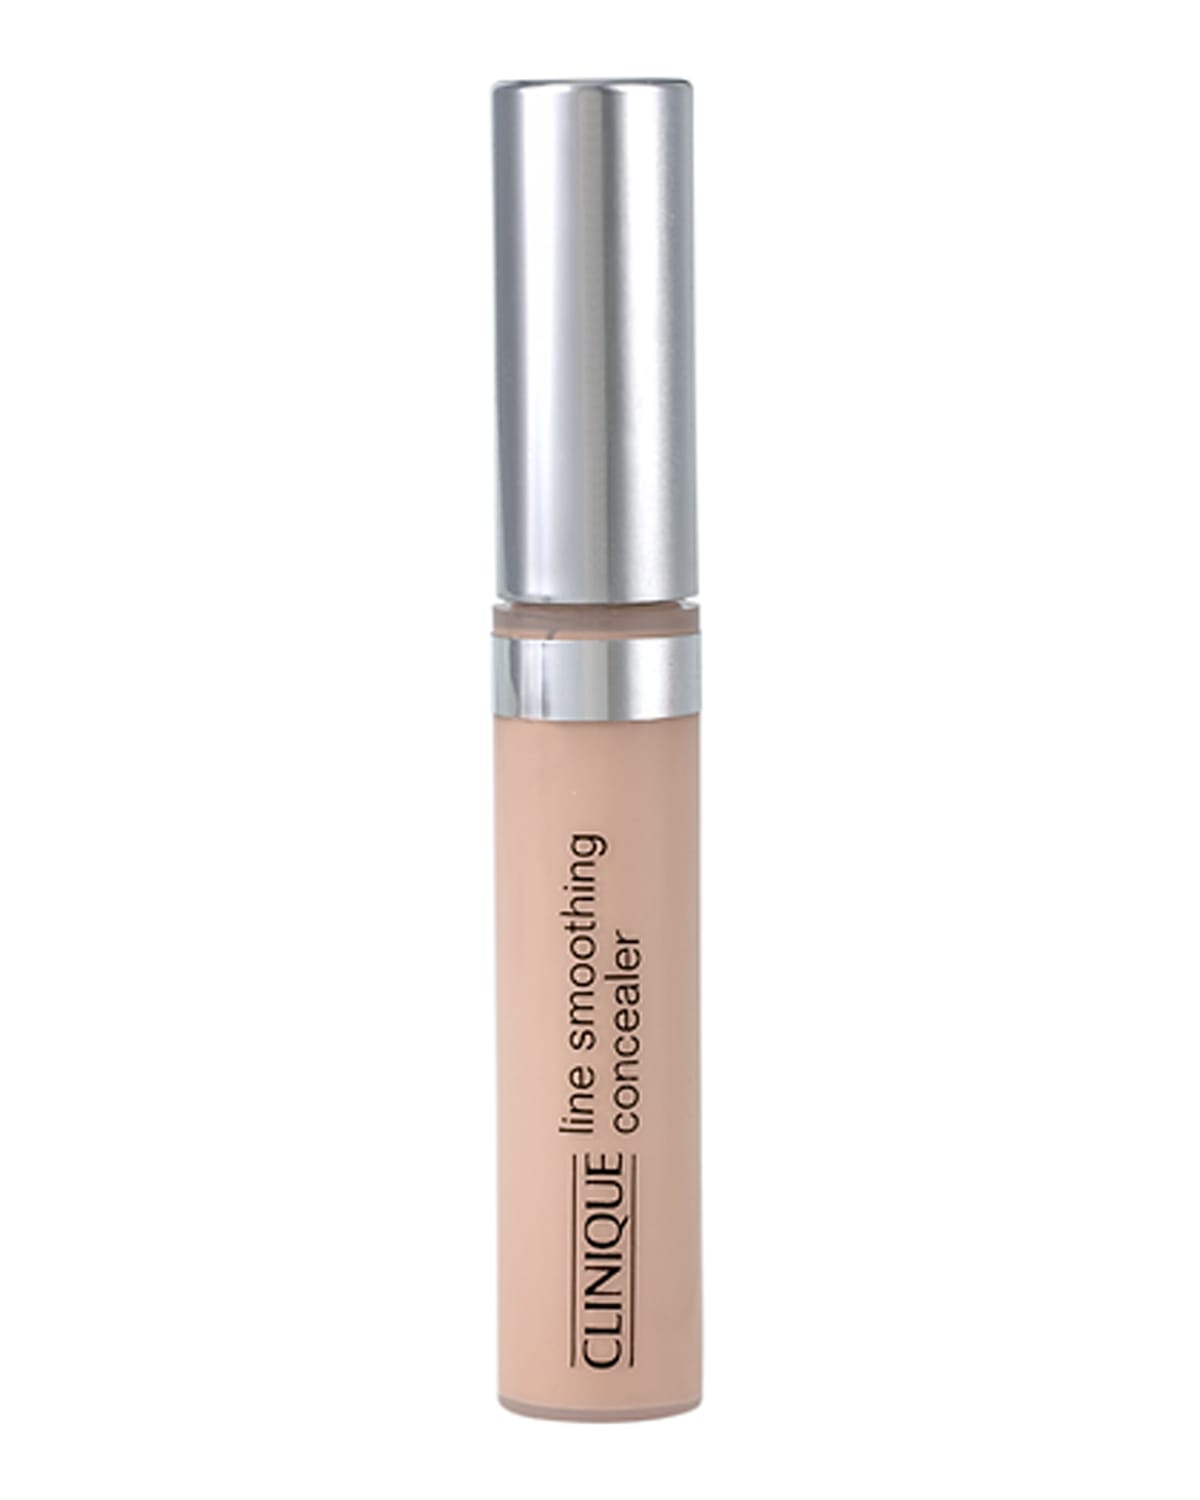 Clinique Smoothing Concealer